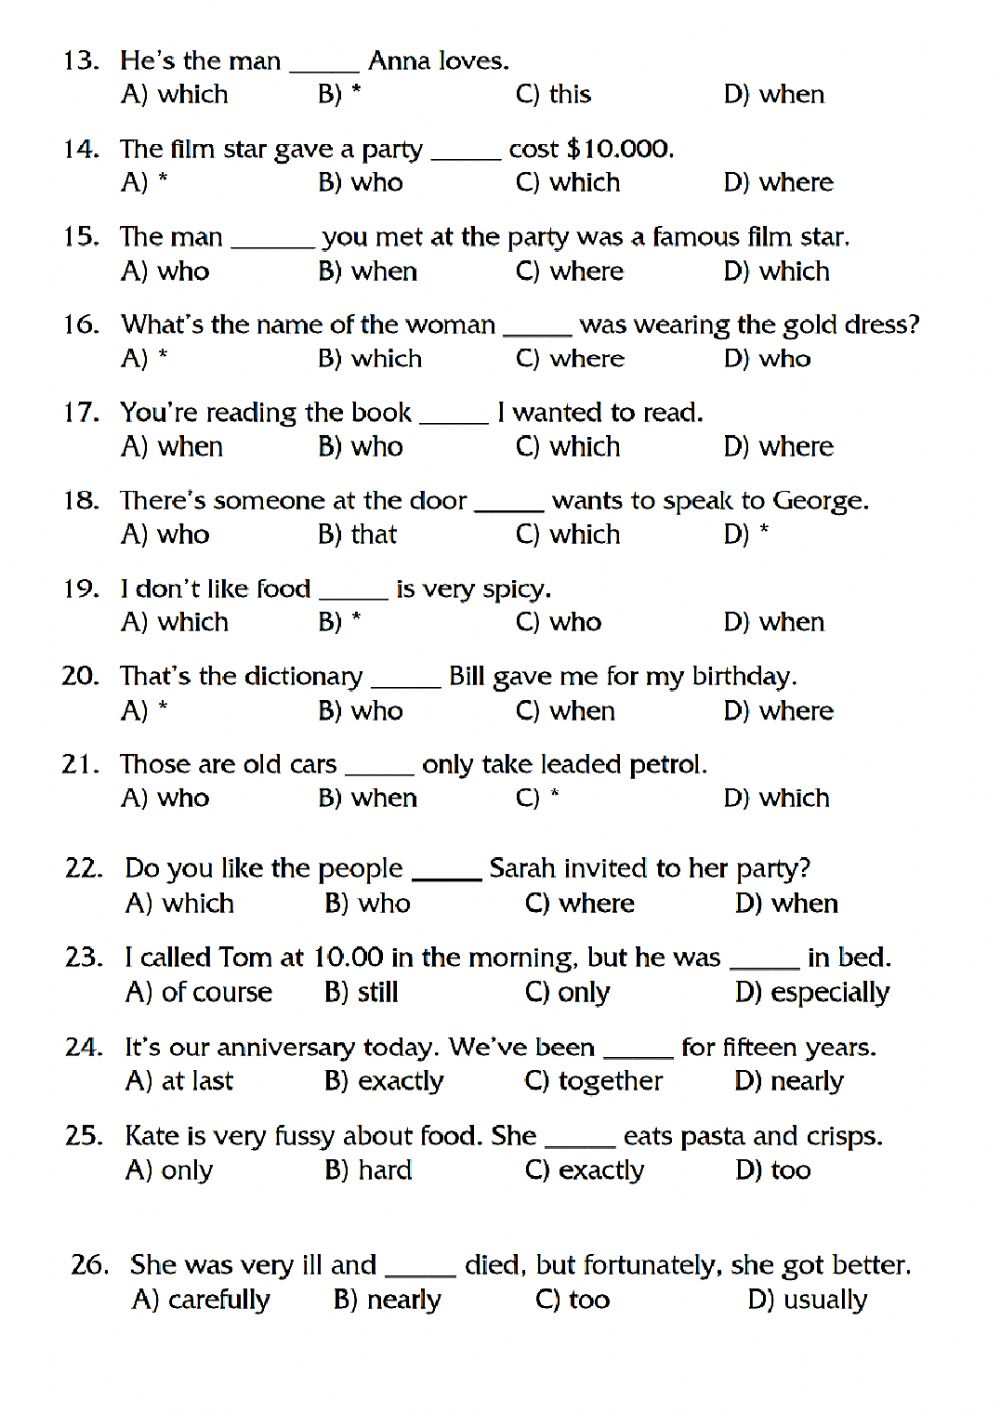 Relative Pronouns And Adverbs Worksheet Pdf